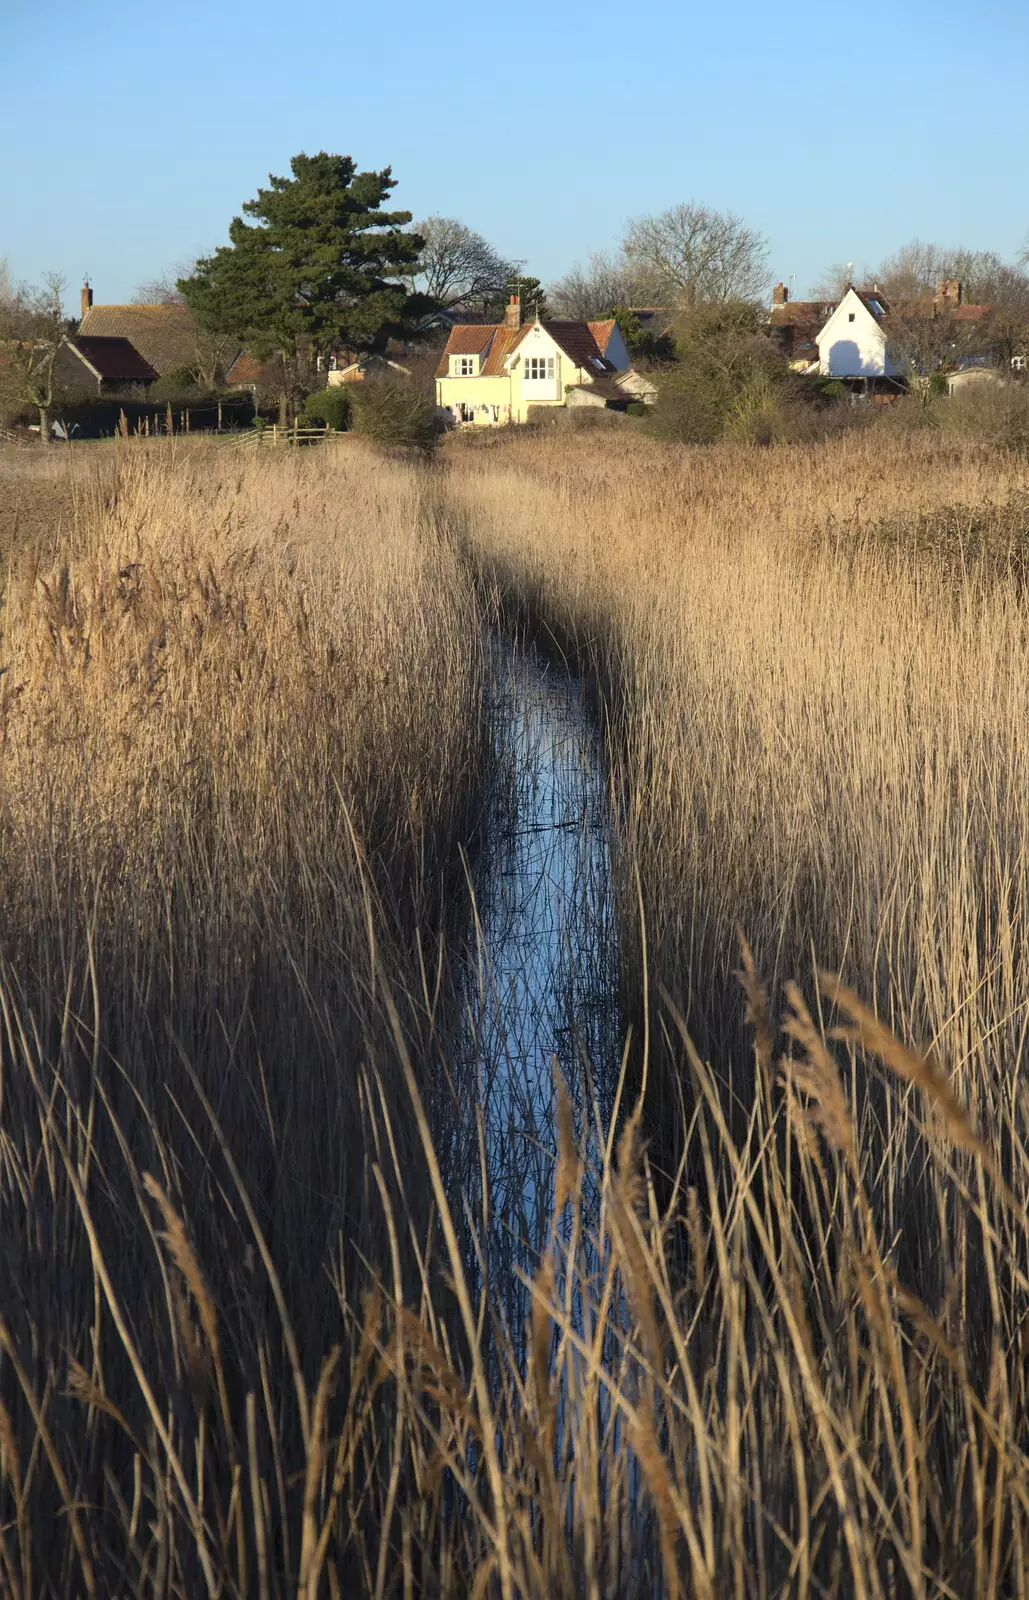 In the marsh reeds, from An Orford Day Out, Orford, Suffolk - 17th February 2018